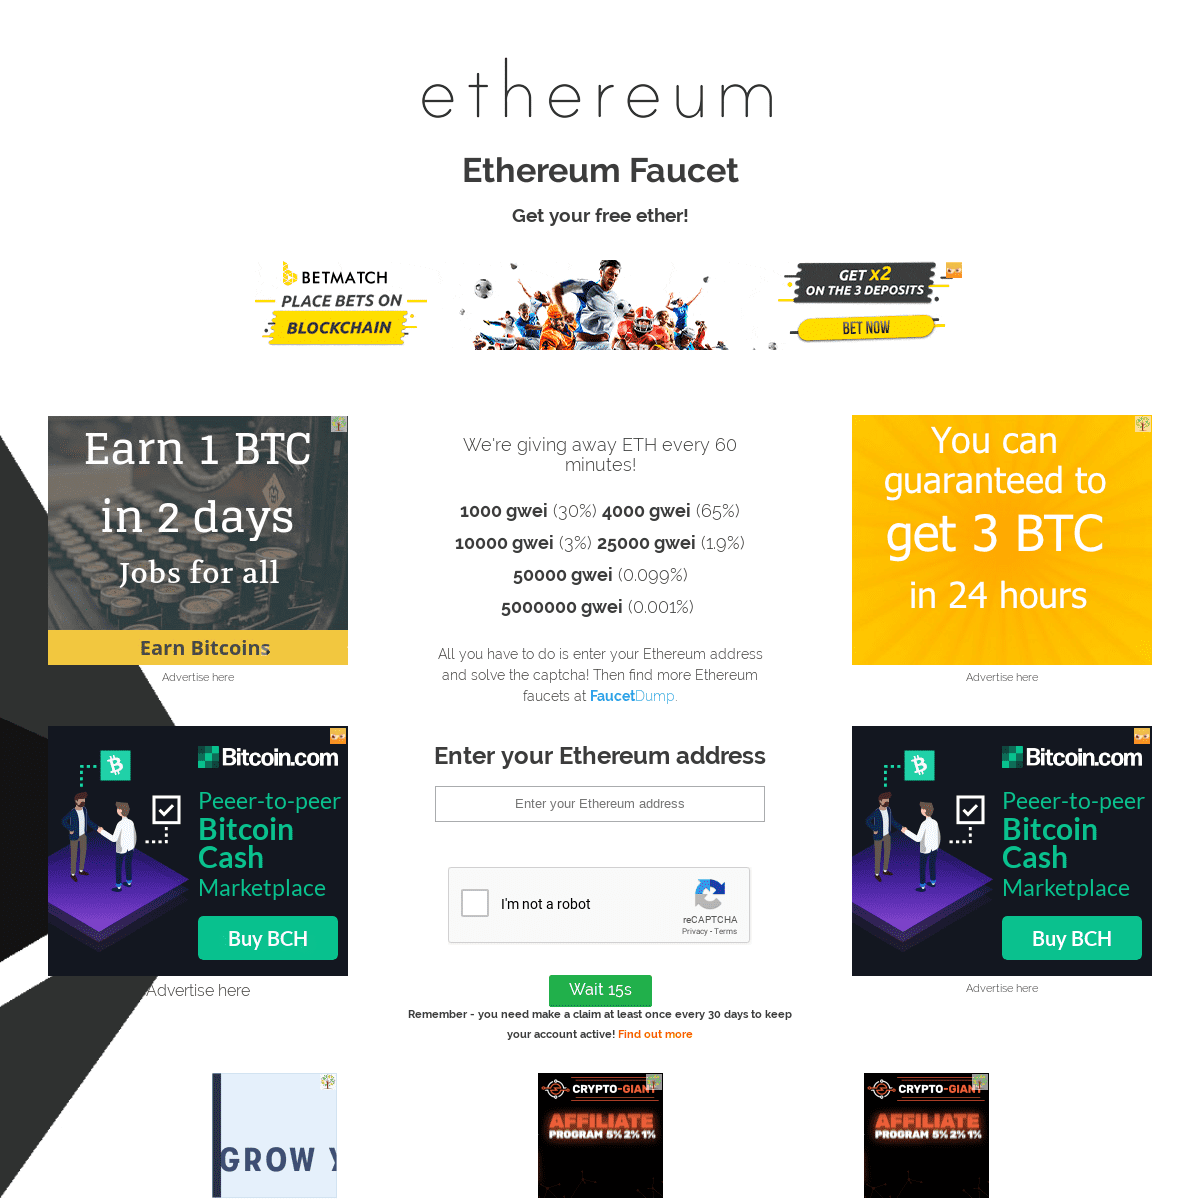 Ethereum for free! Claim your free ether from the Ethereum Faucet!